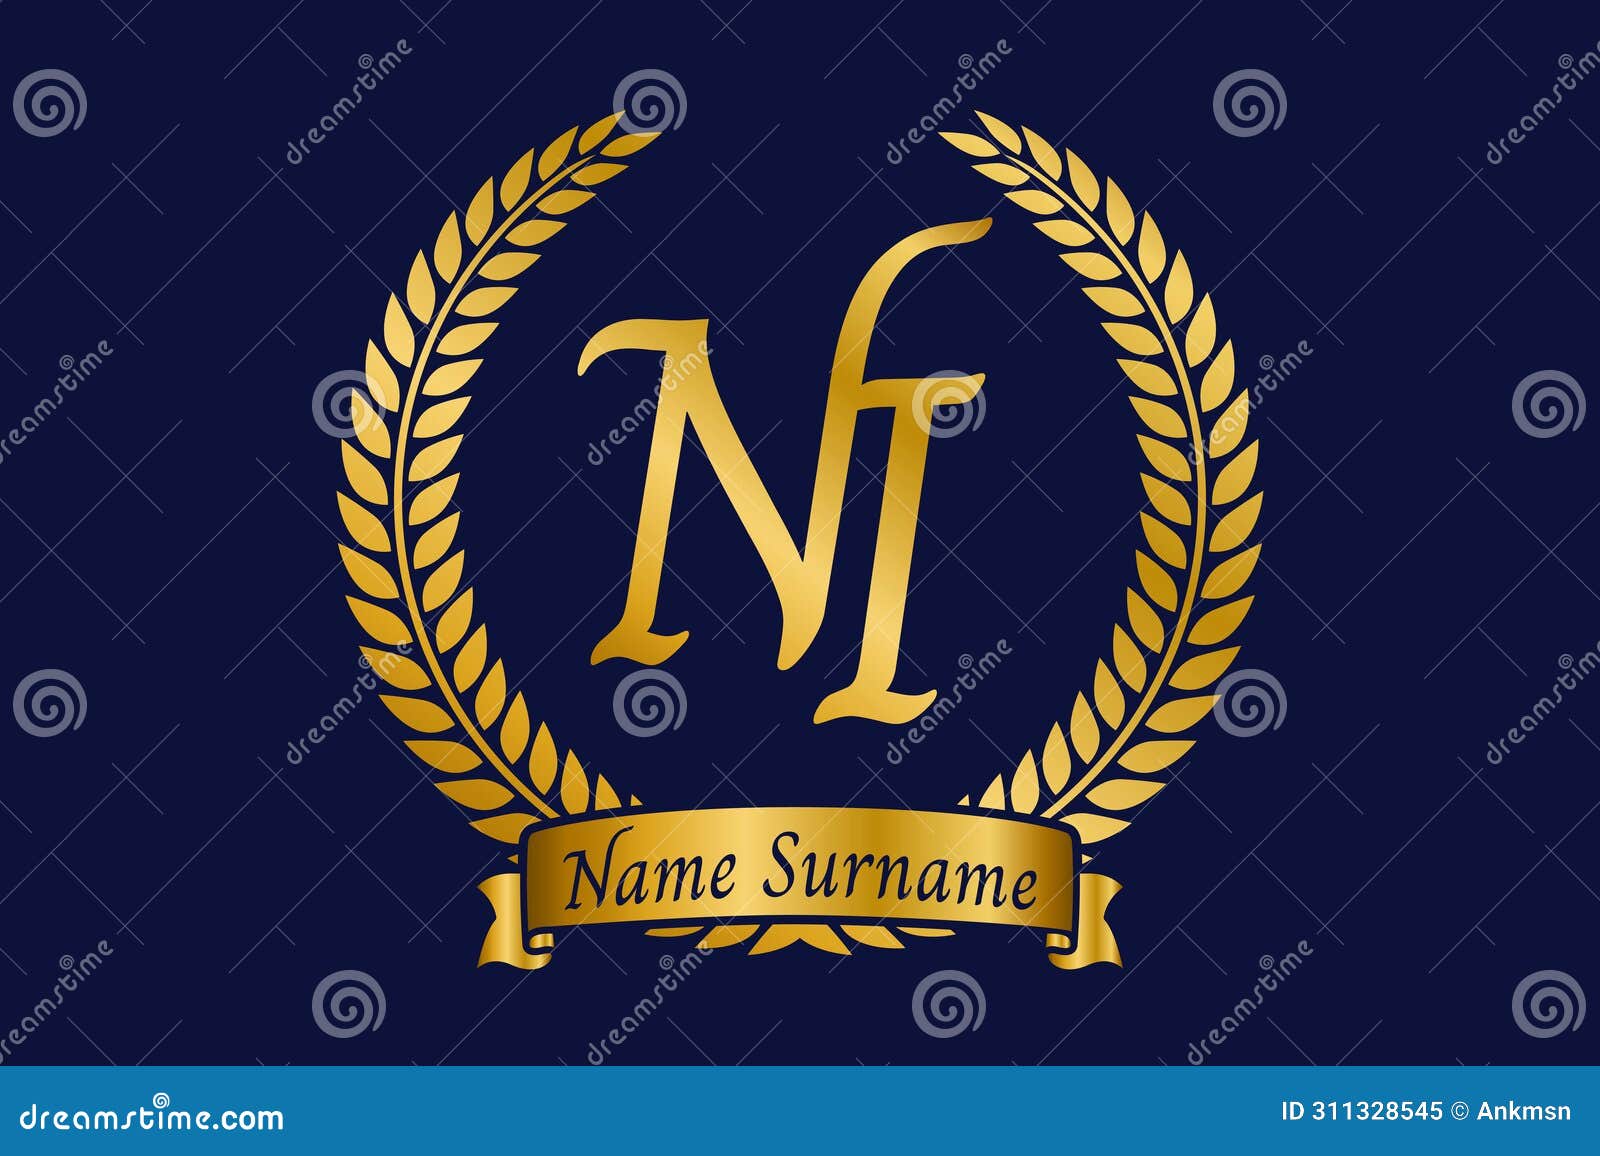 initial letter n and i, ni monogram logo  with laurel wreath. luxury golden calligraphy font